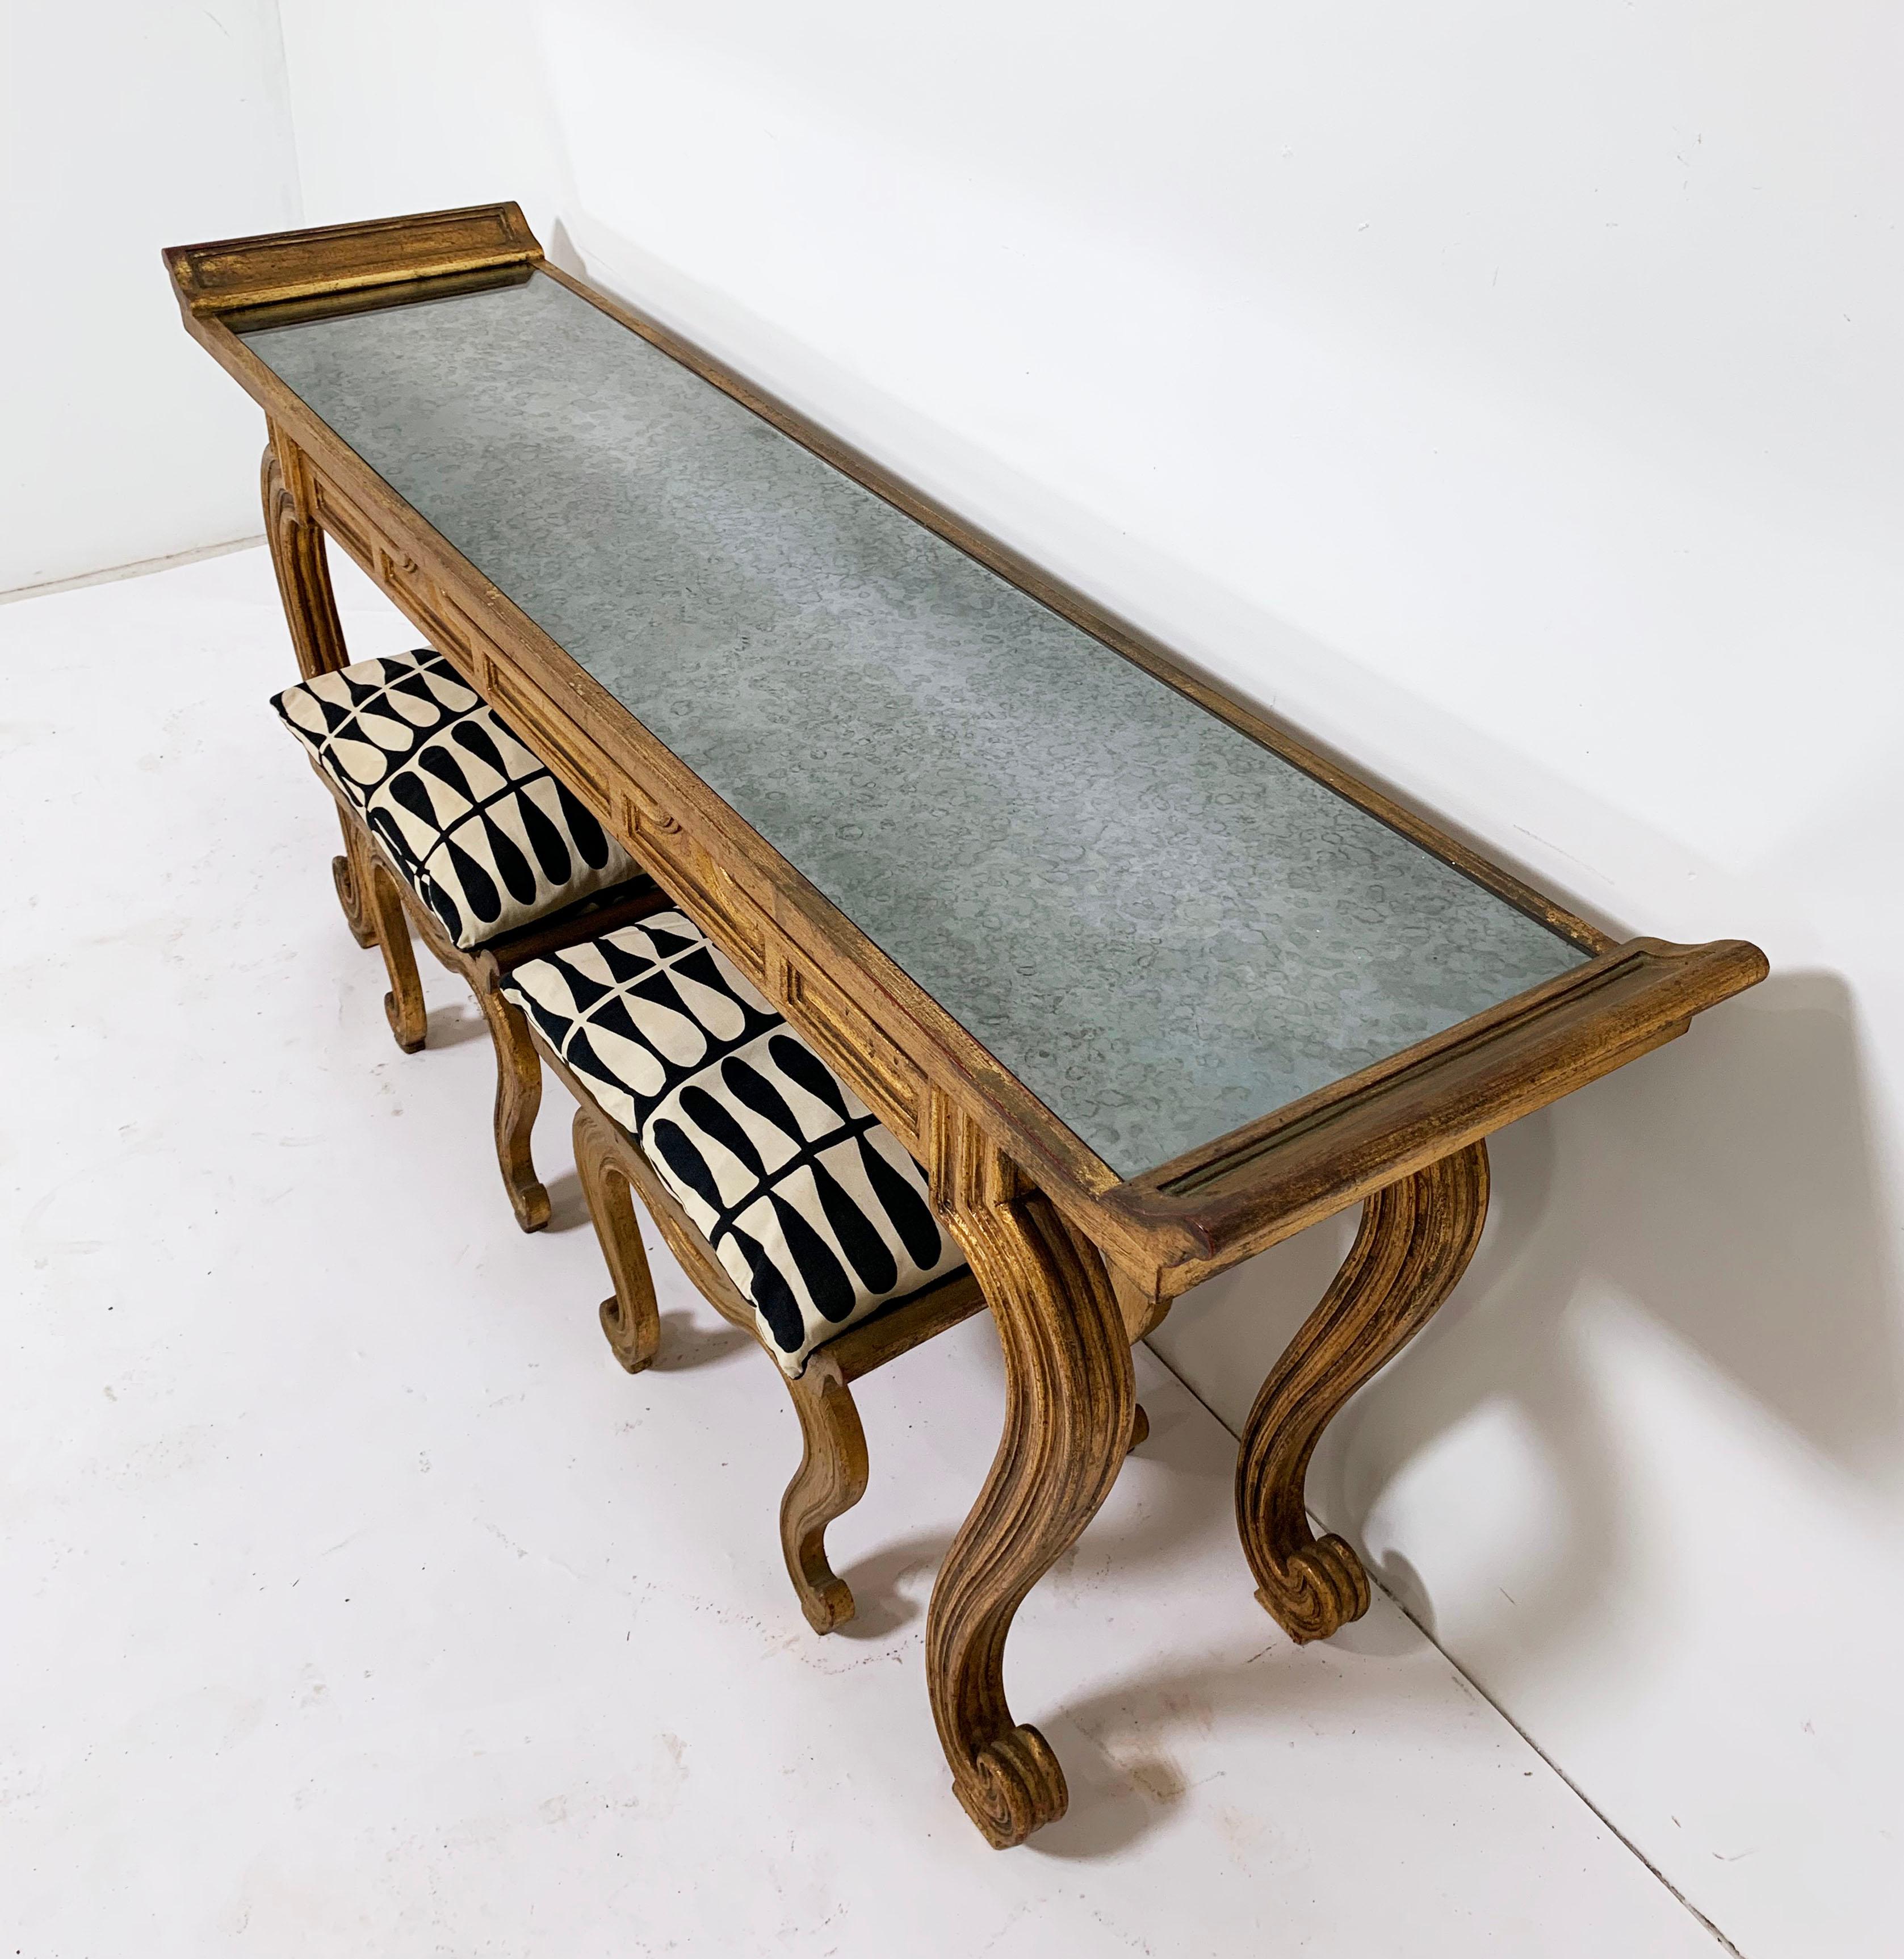 1950s carved wood and gold painted console with veined mirrored top and bench seats, made in Spain by architect Francisco Hurtado. The console measures: 65